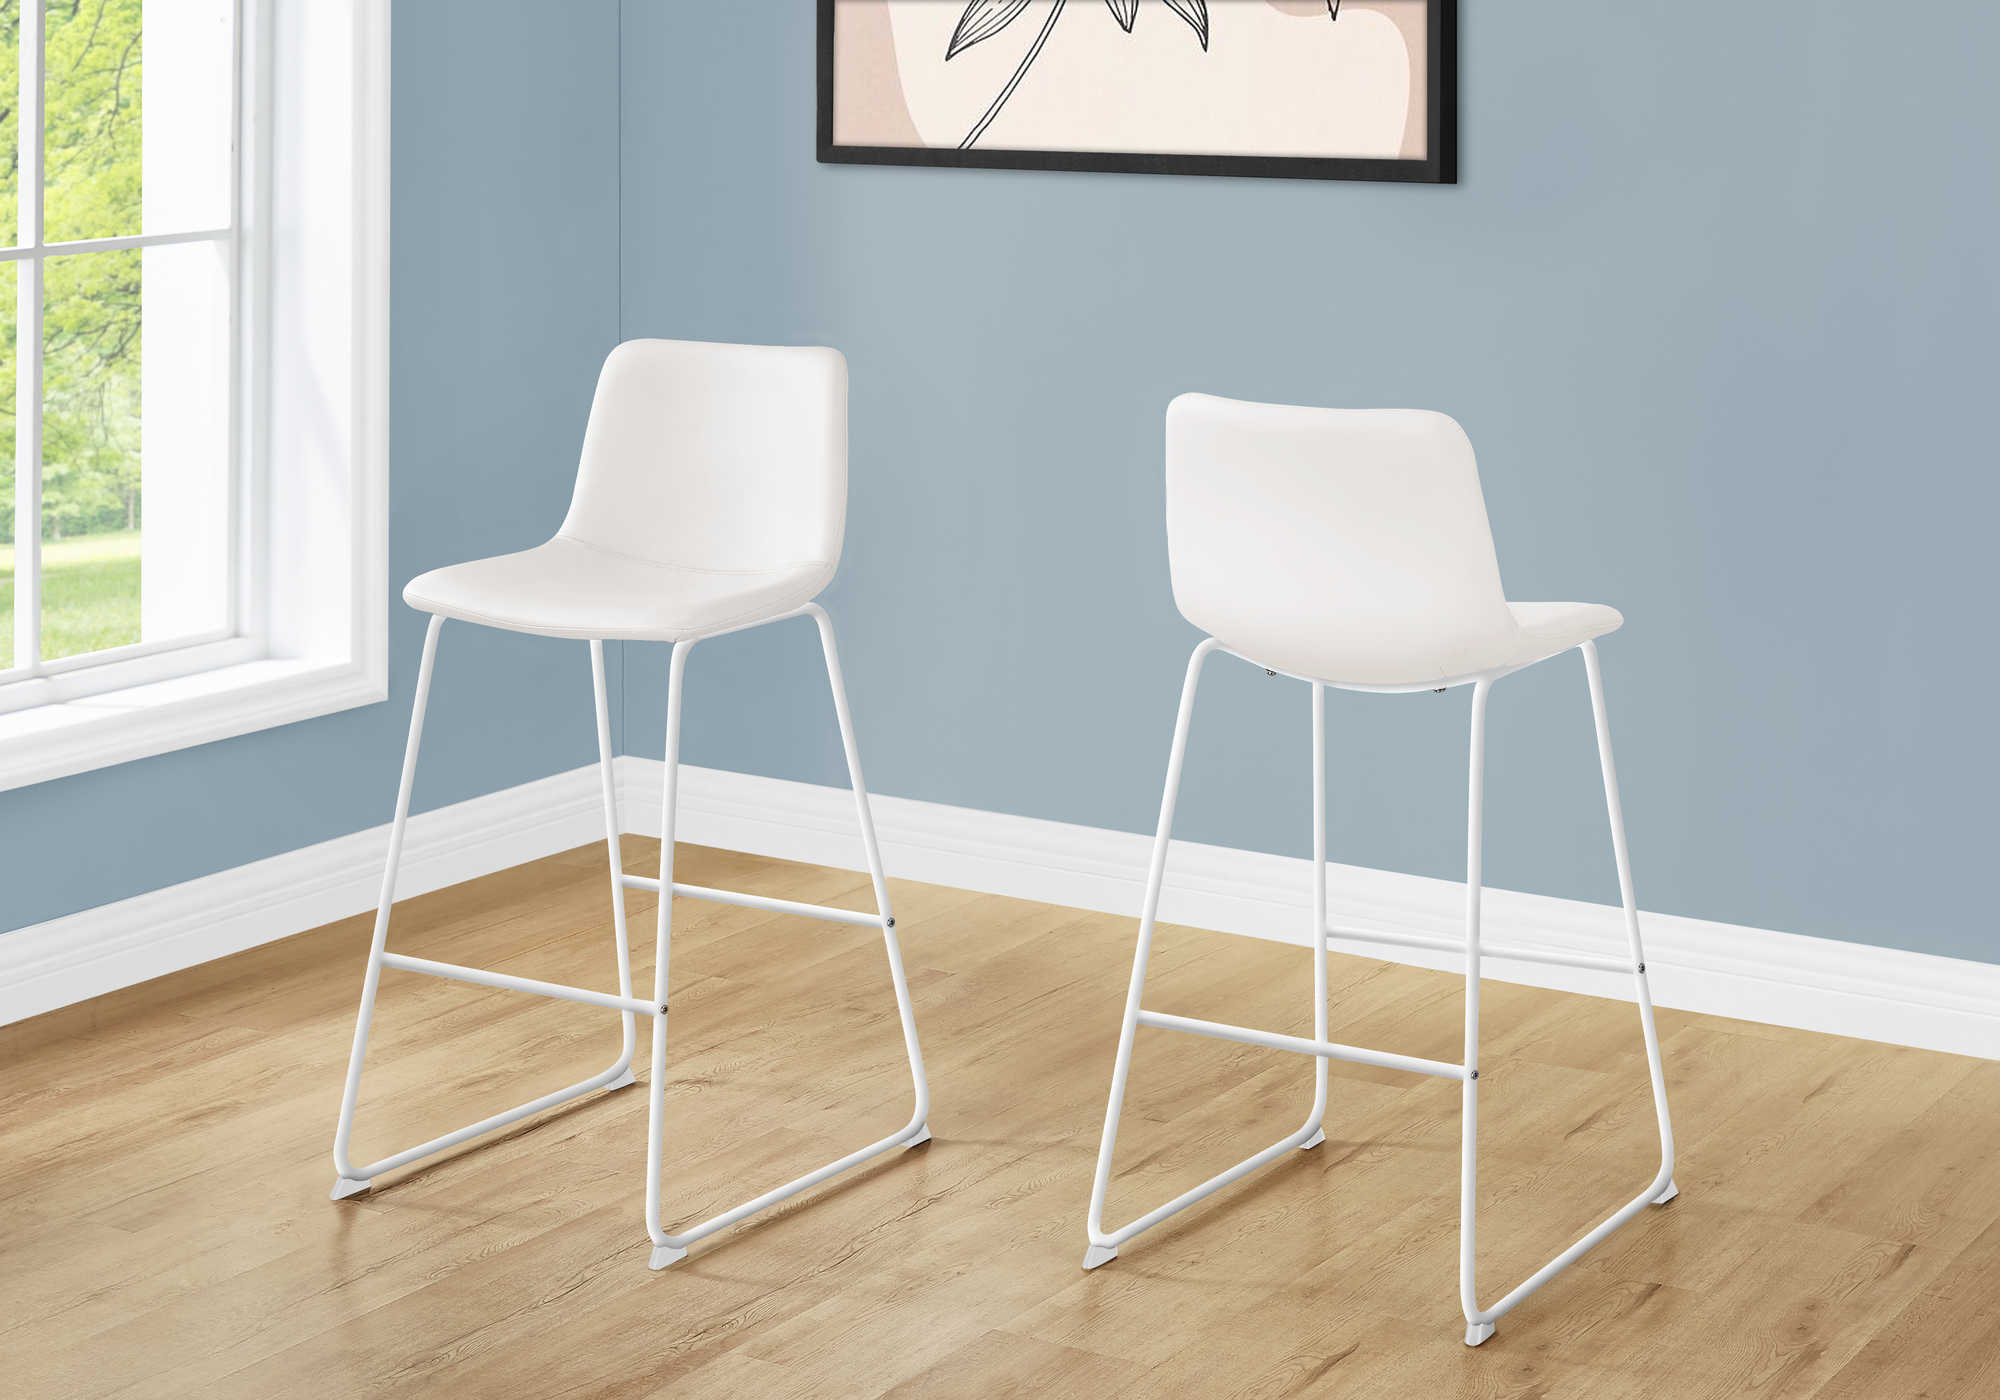 OFFICE CHAIR - WHITE LEATHER-LOOK / STAND-UP DESK